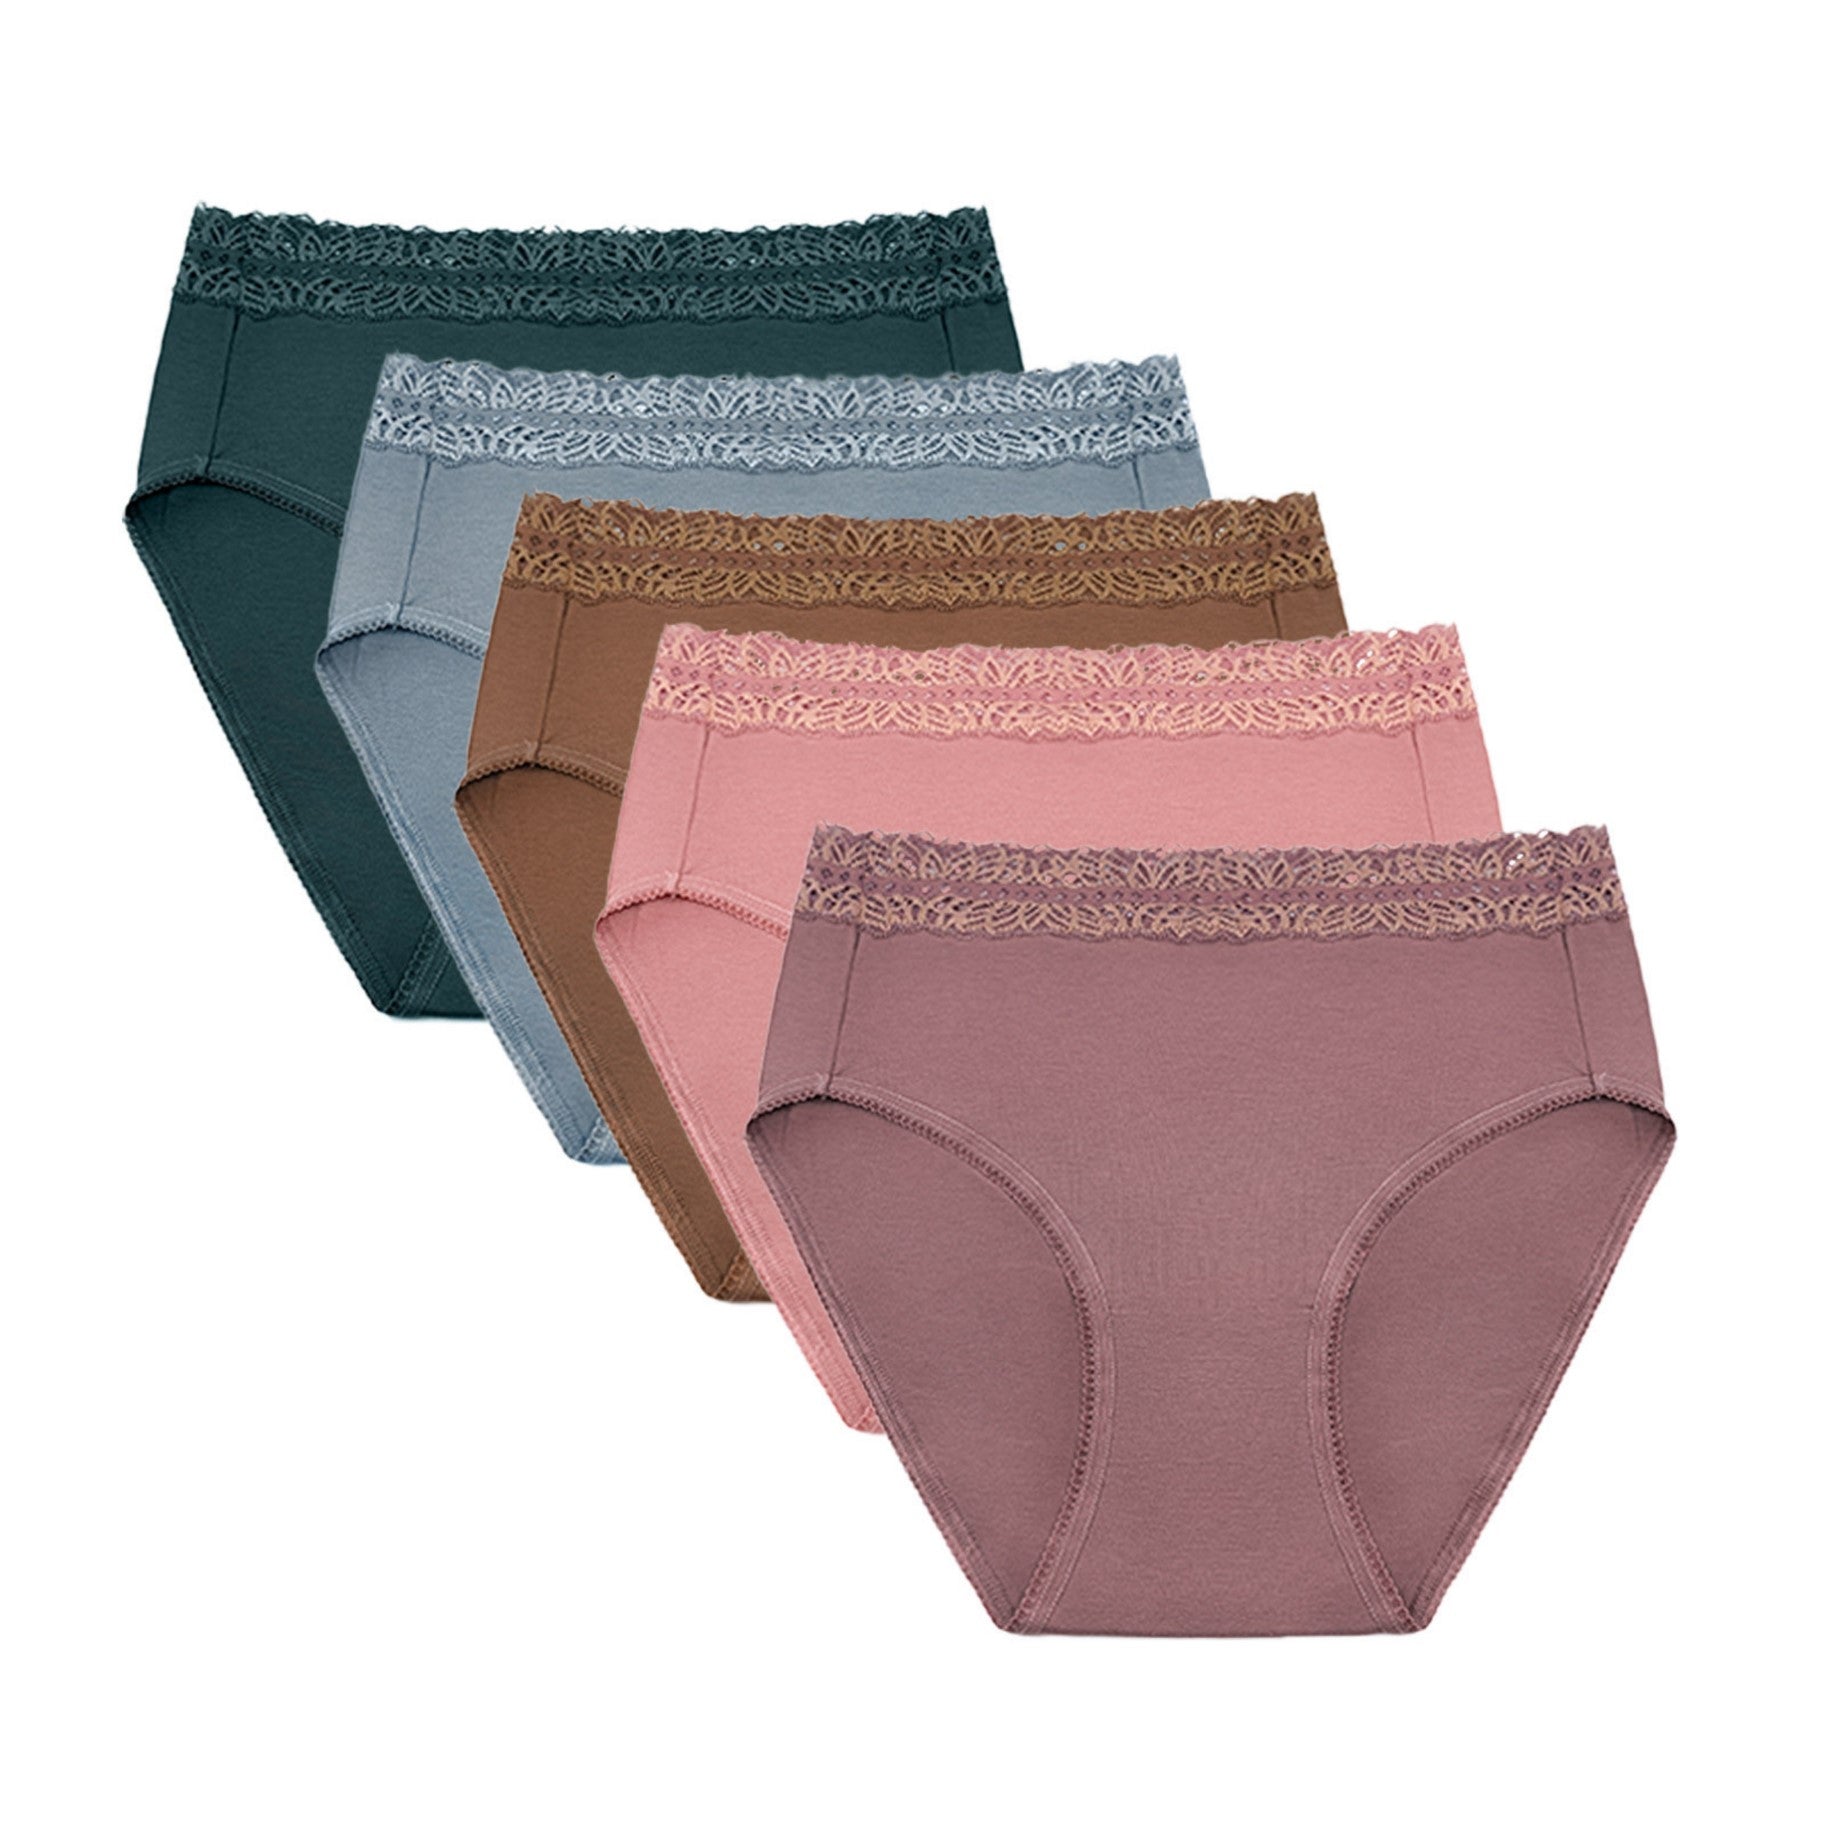 Kindred Bravely High Waisted Postpartum Recovery Panty 5 Pack Multi Neutral  – Baby & Me Maternity